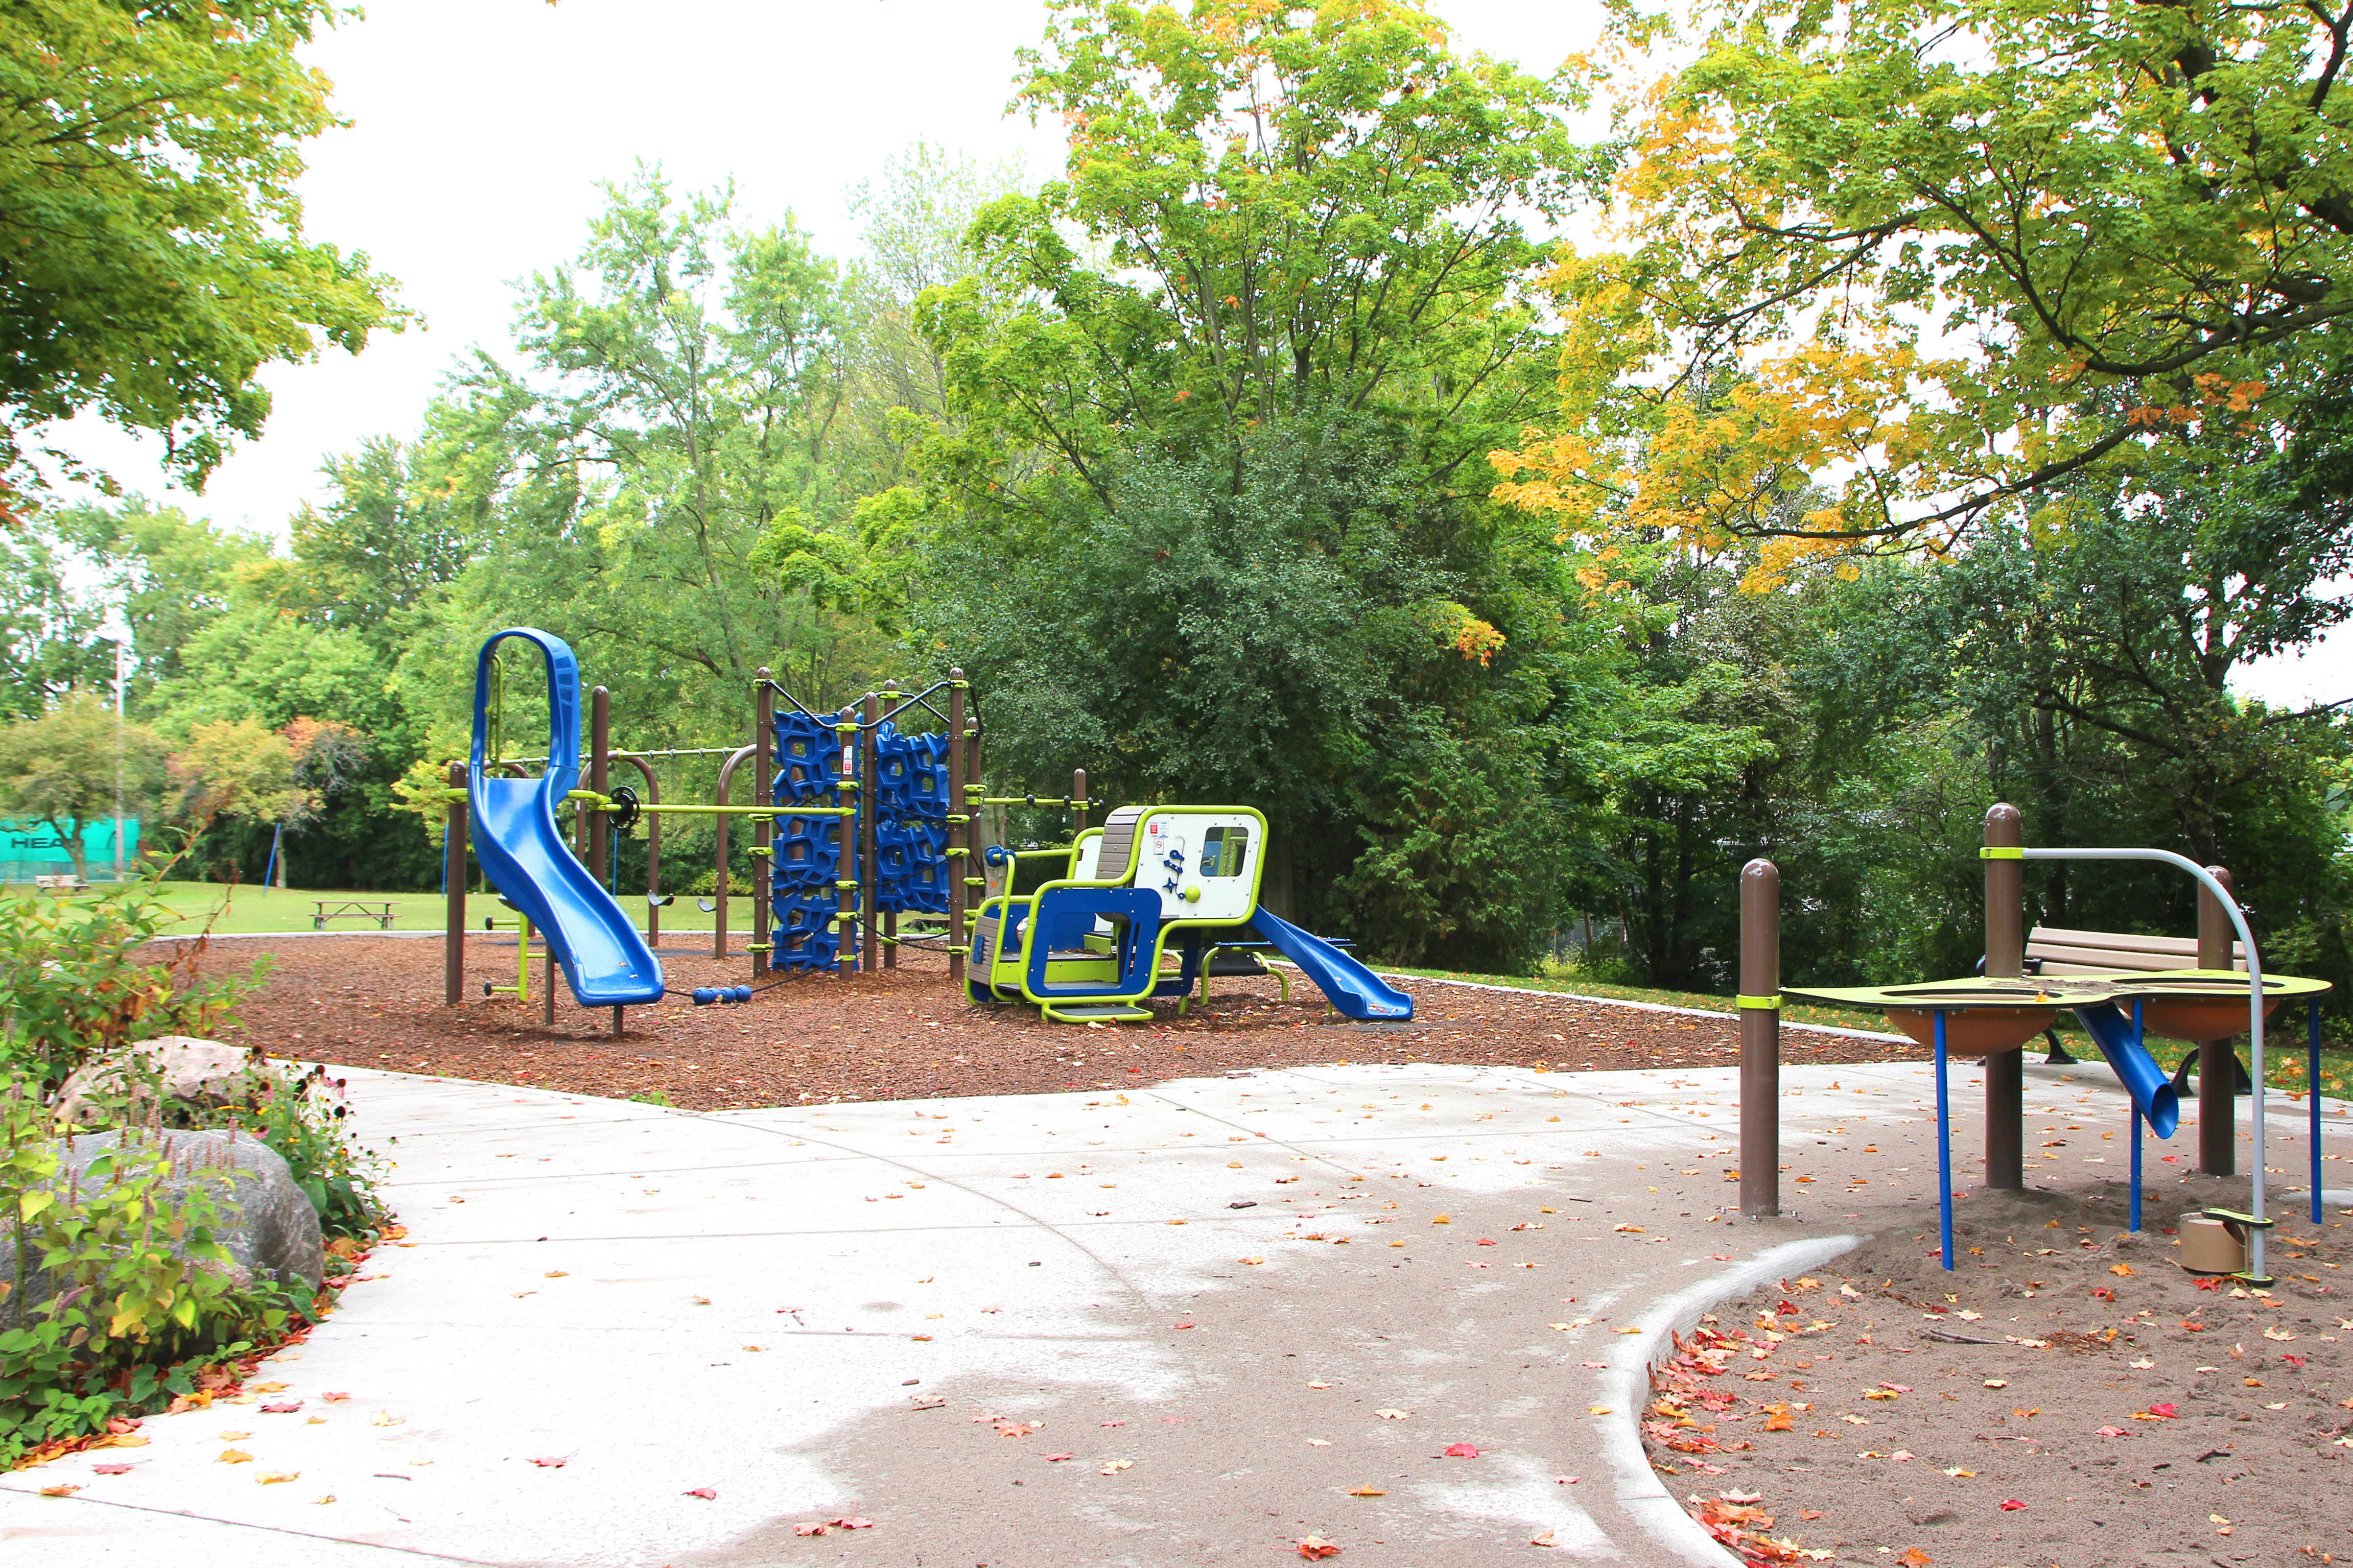 Banbury Park Playground after construction showing a circular seating area with stones in the foreground, an accessible sand table in blue and lime green parallel to two benches, and a play structure in the background with a blue slide and climbing features in blue and green.